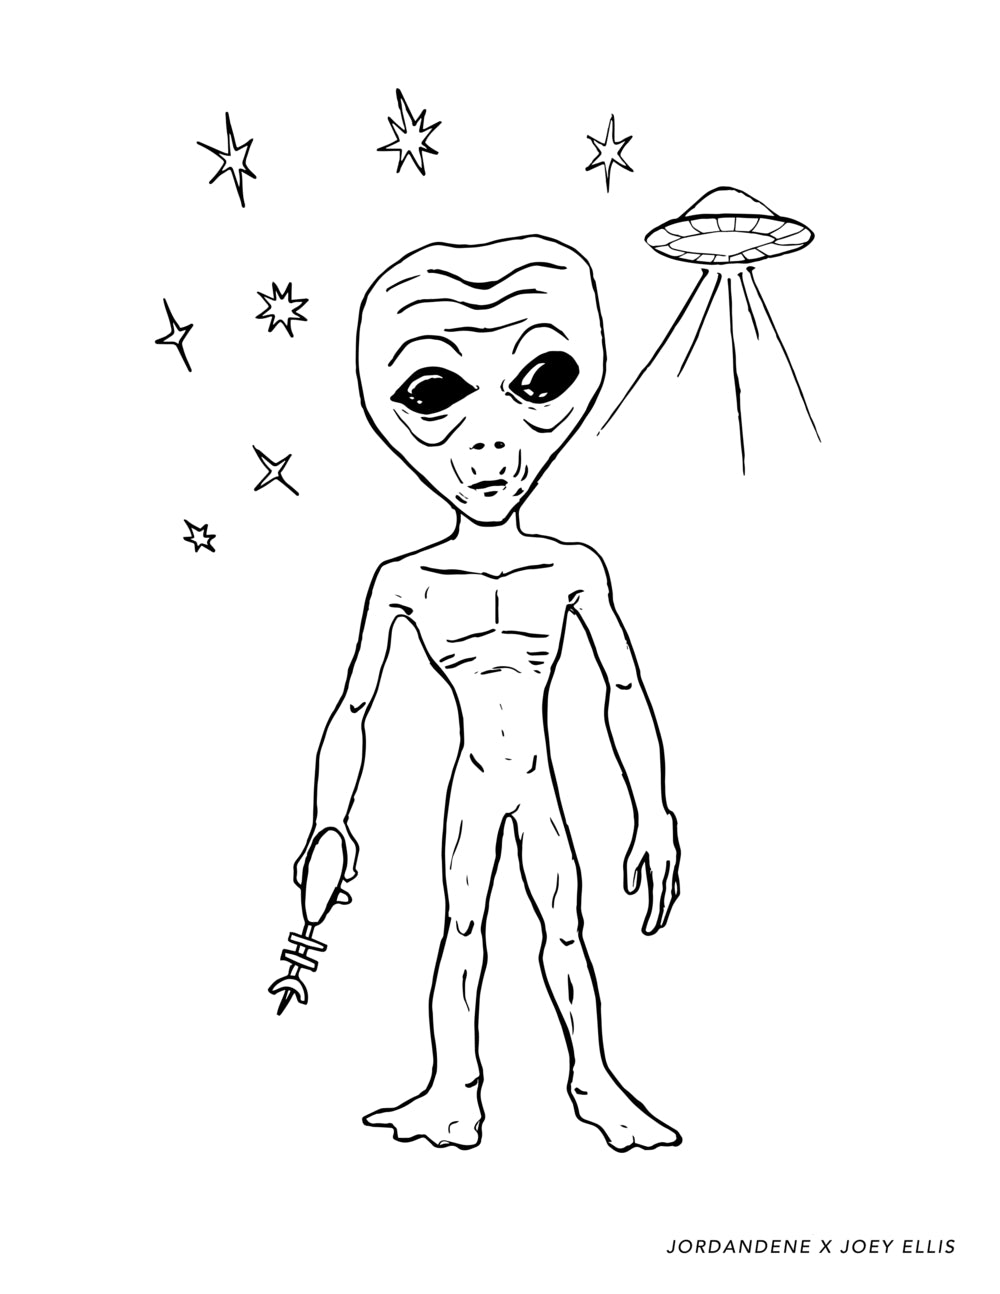 X-Files Alien | Free Coloring Page